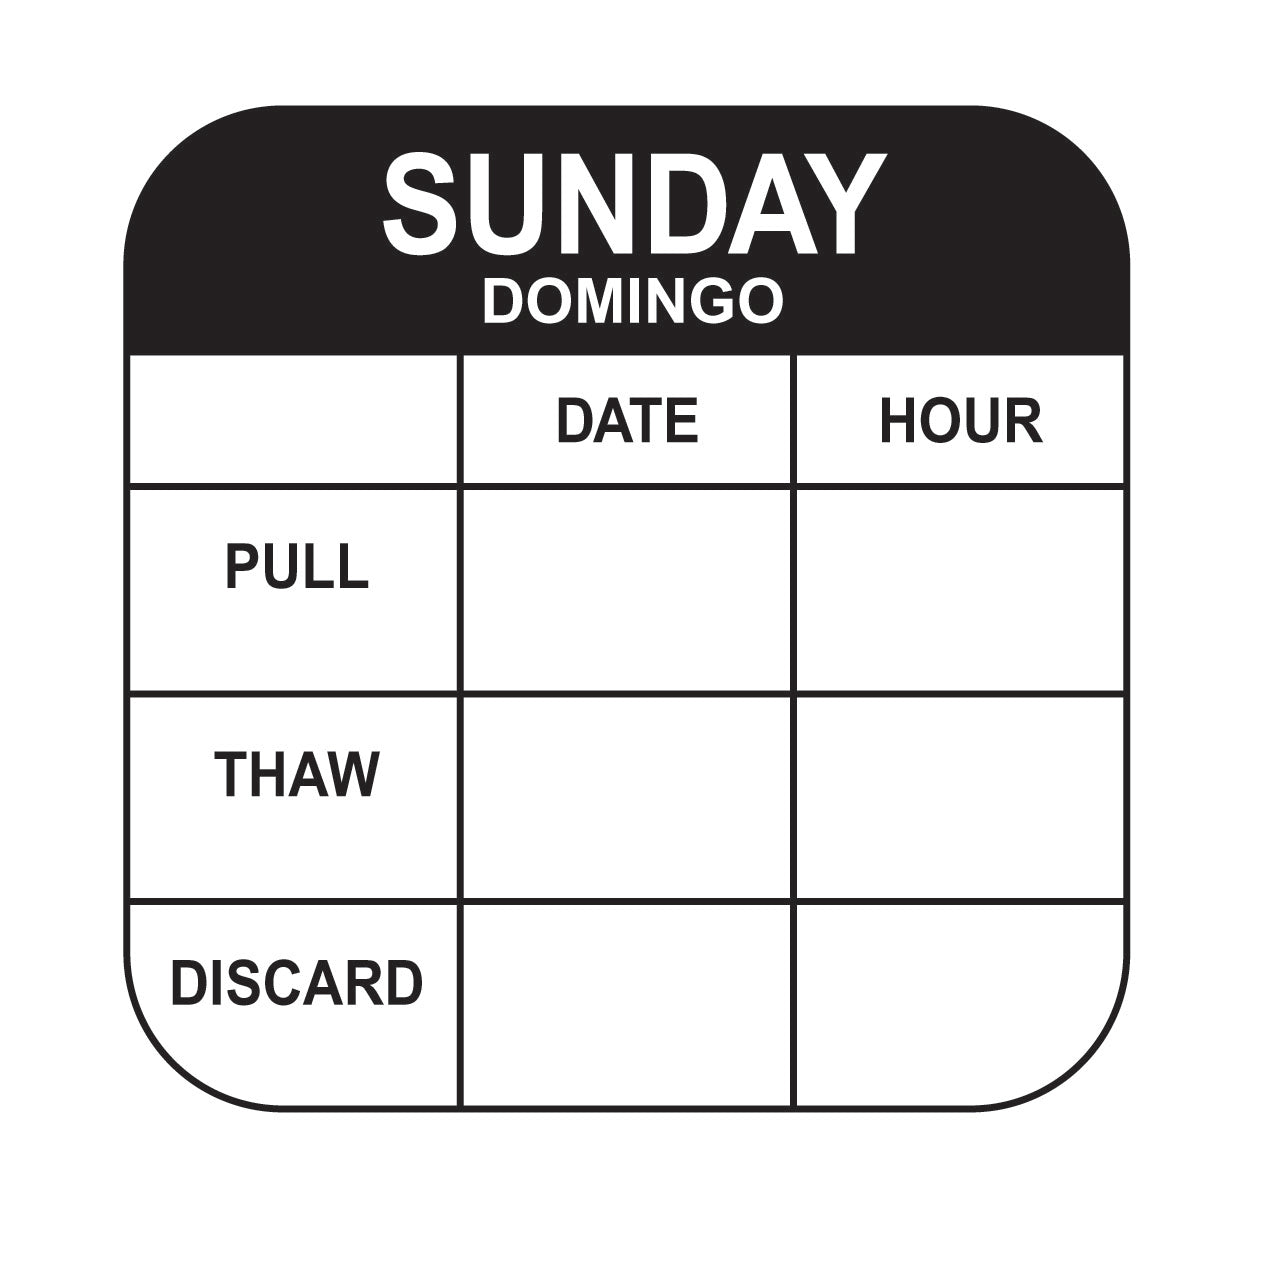 1" x 1" Sunday-Domingo Removable Pull-Thaw Date Label®